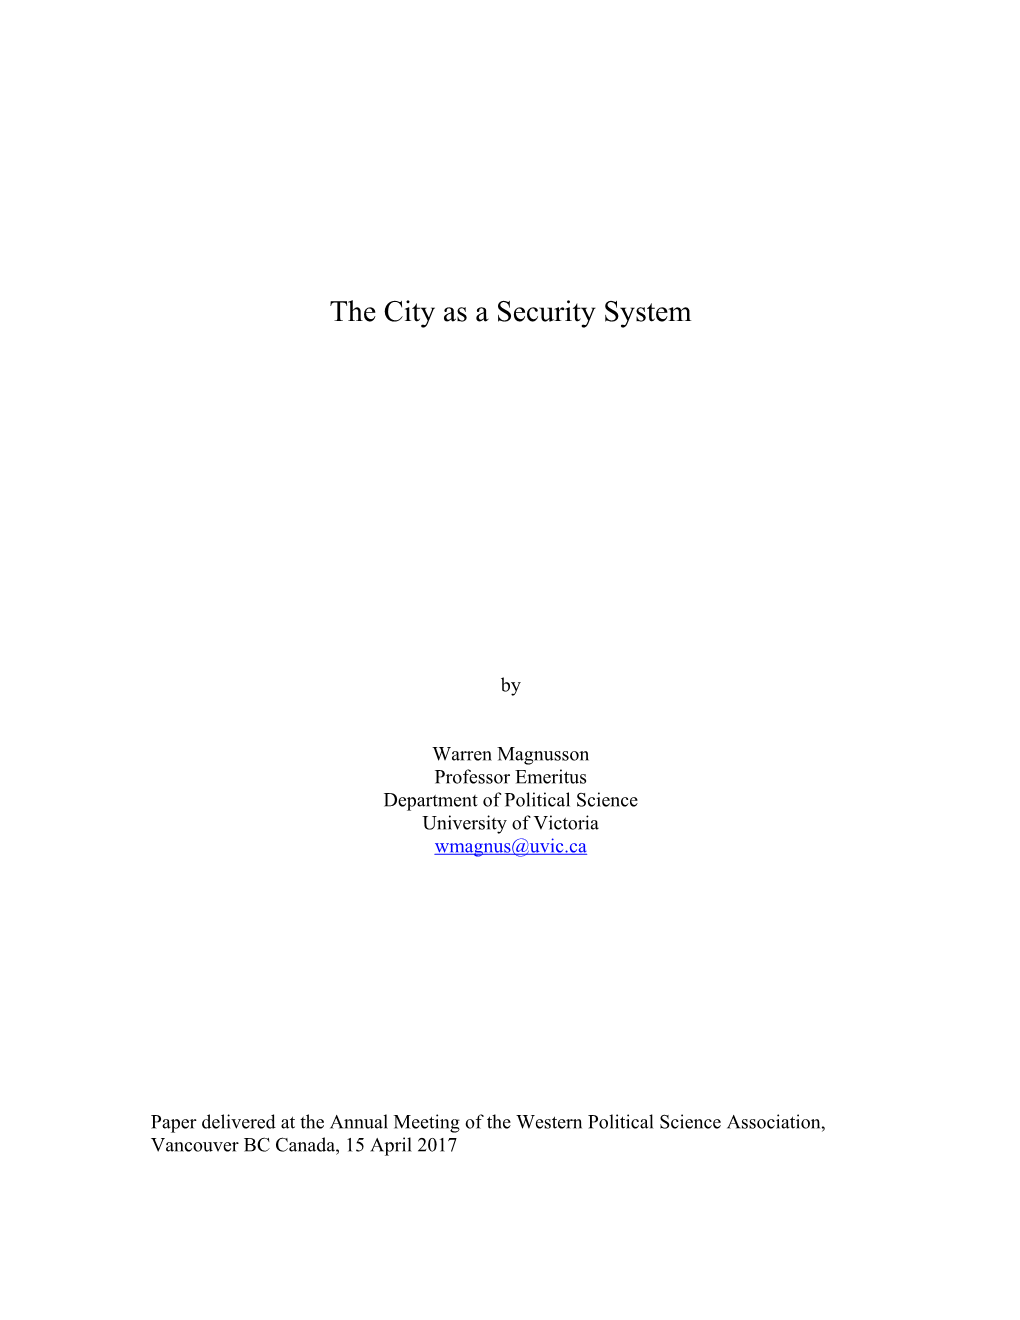 The City As a Security System